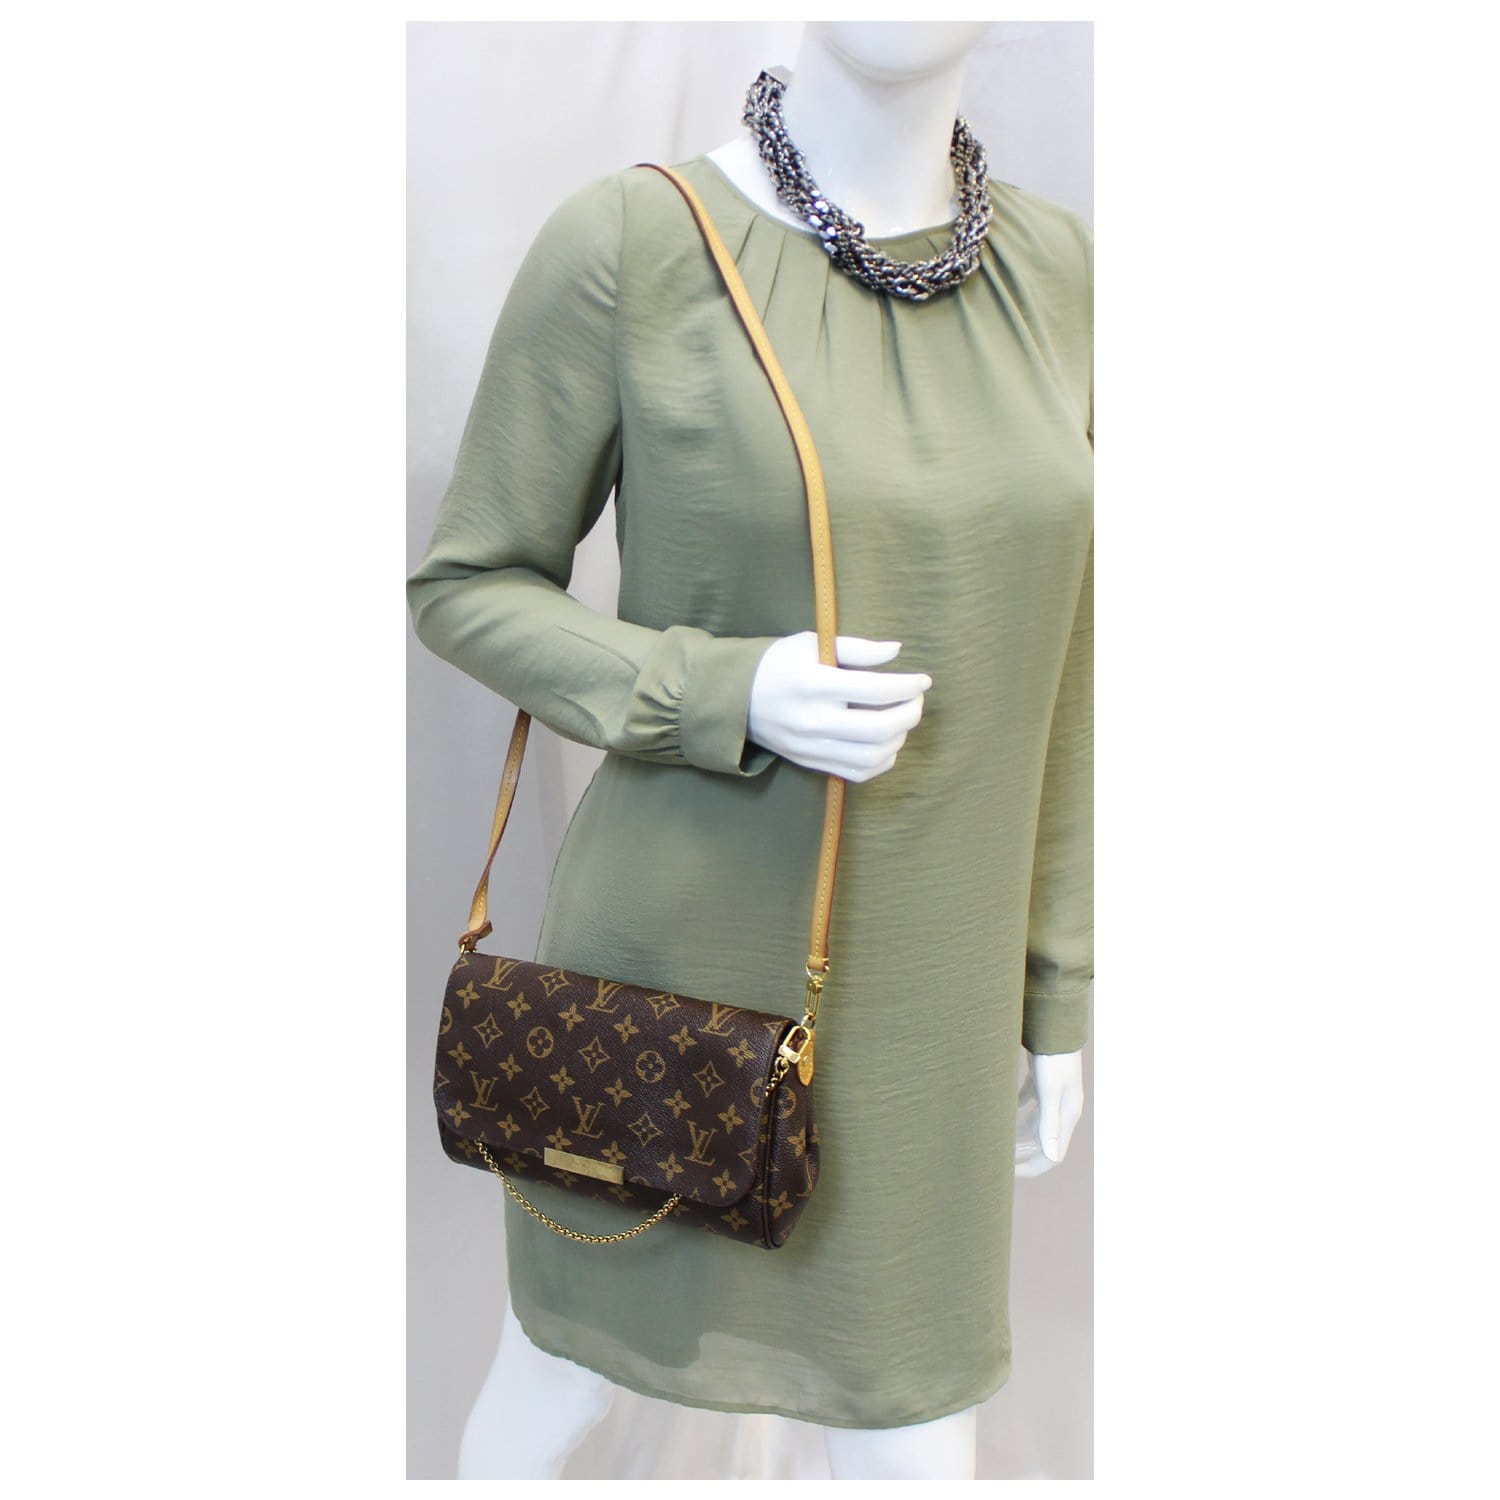 louis vuitton green bag with gold chain